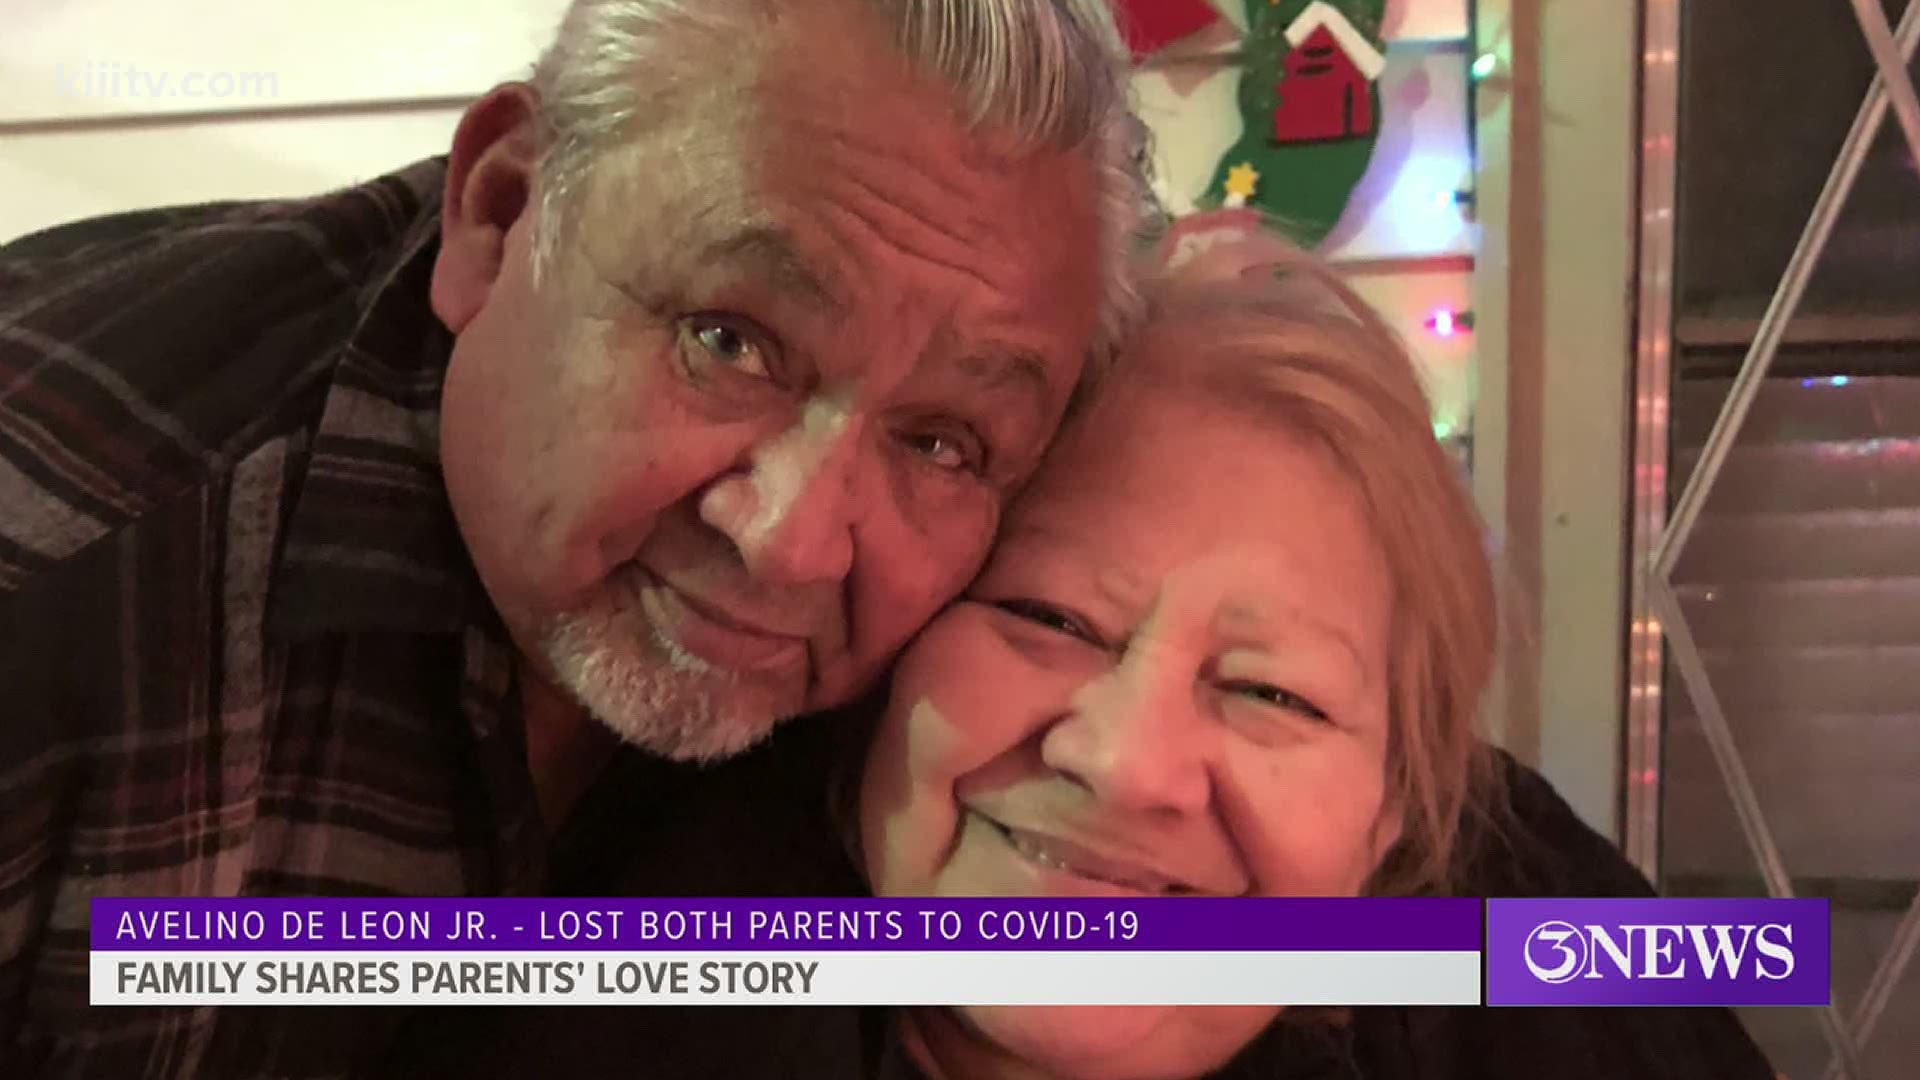 On the morning of August 13, the couple passed away from coronavirus complications within seconds of one another.